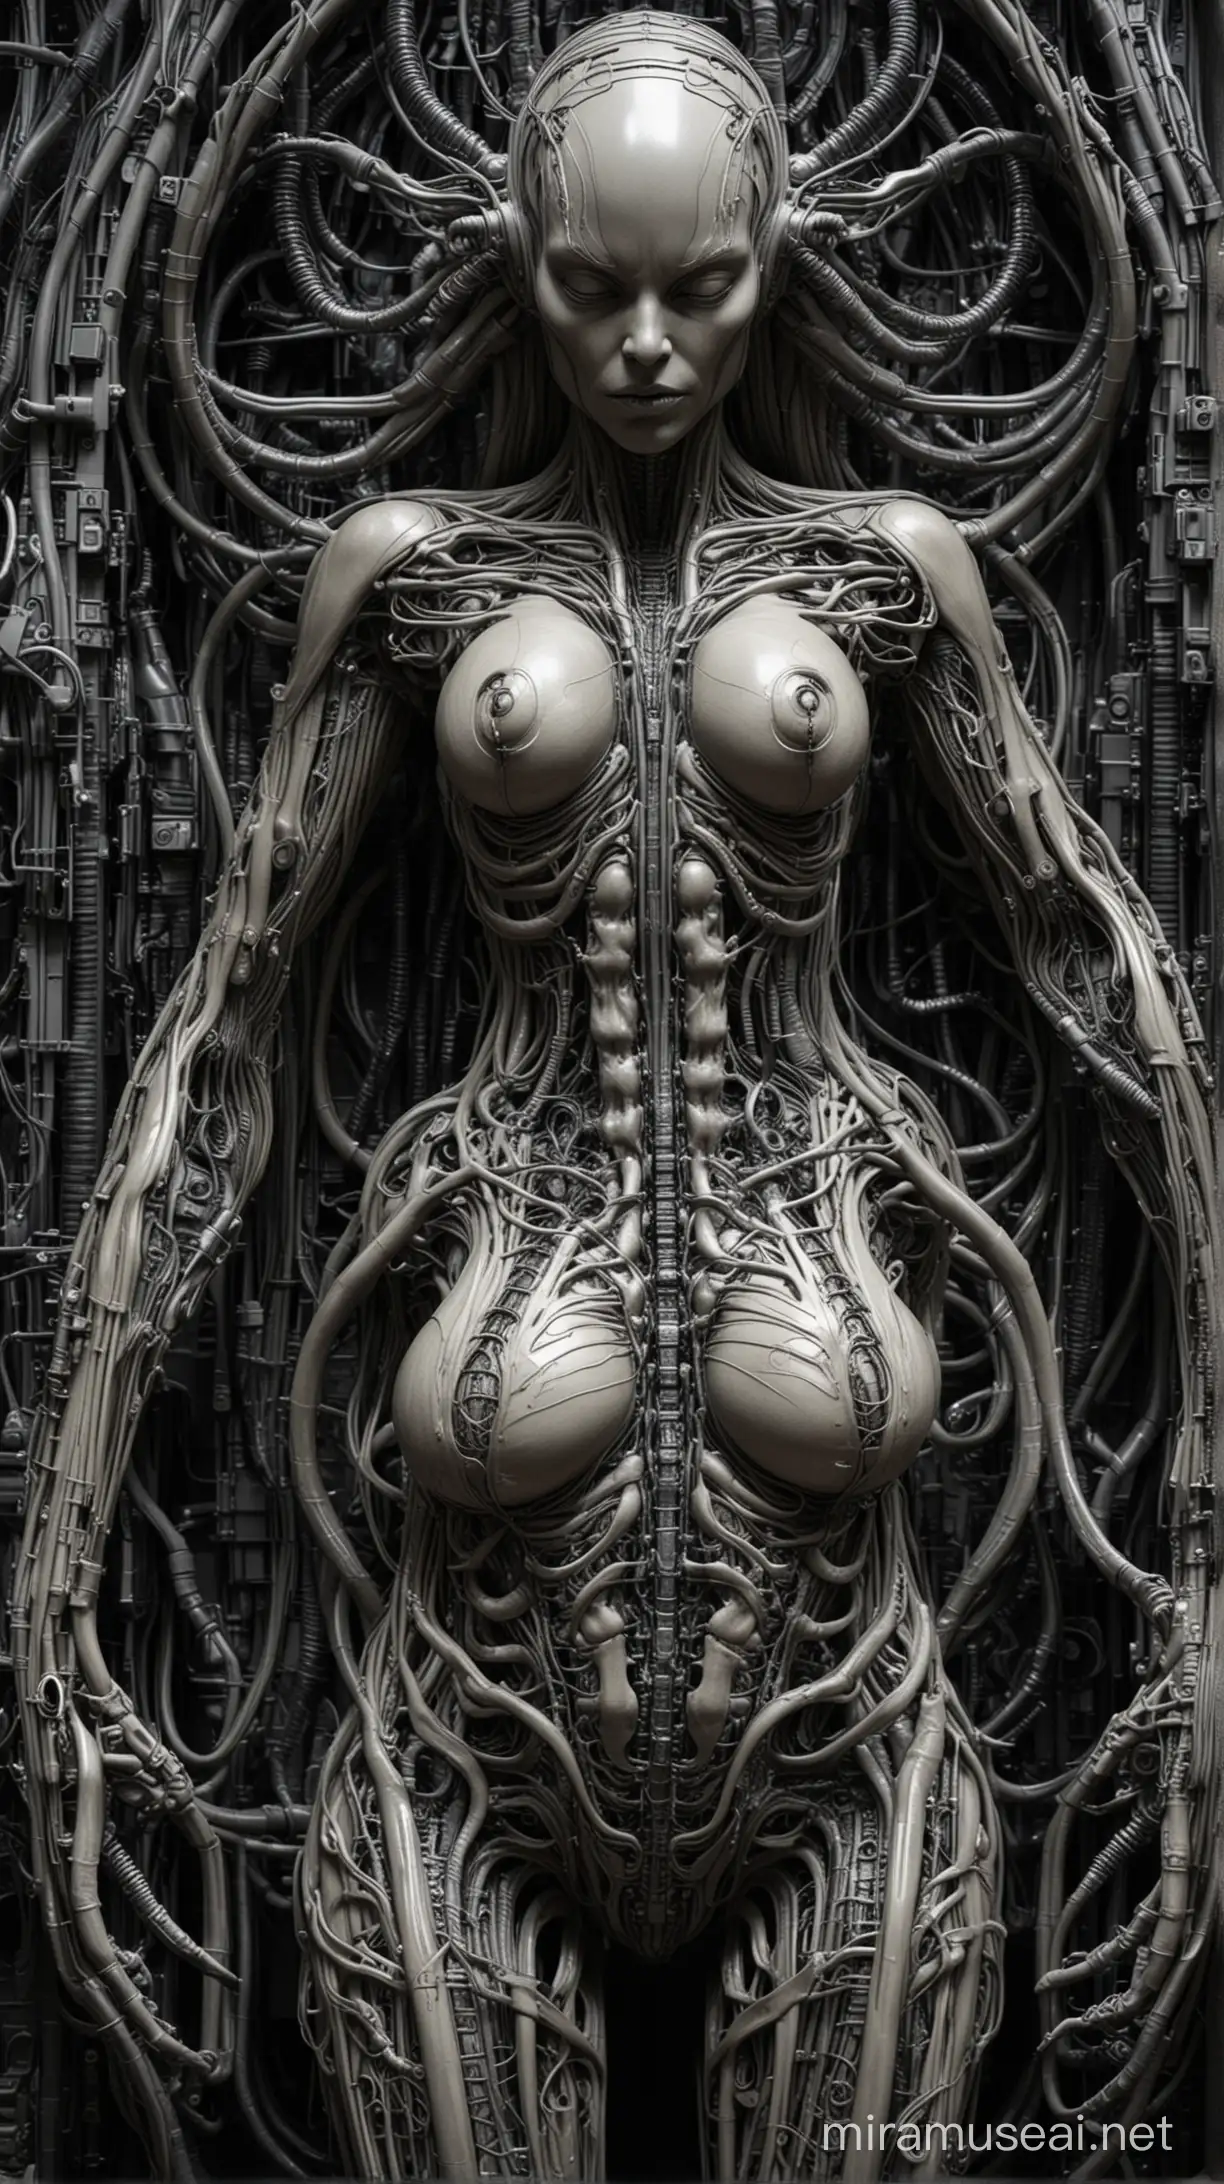 Ethereal Cybernetic Art Woman Genitals Crafted in Giger Style Wires